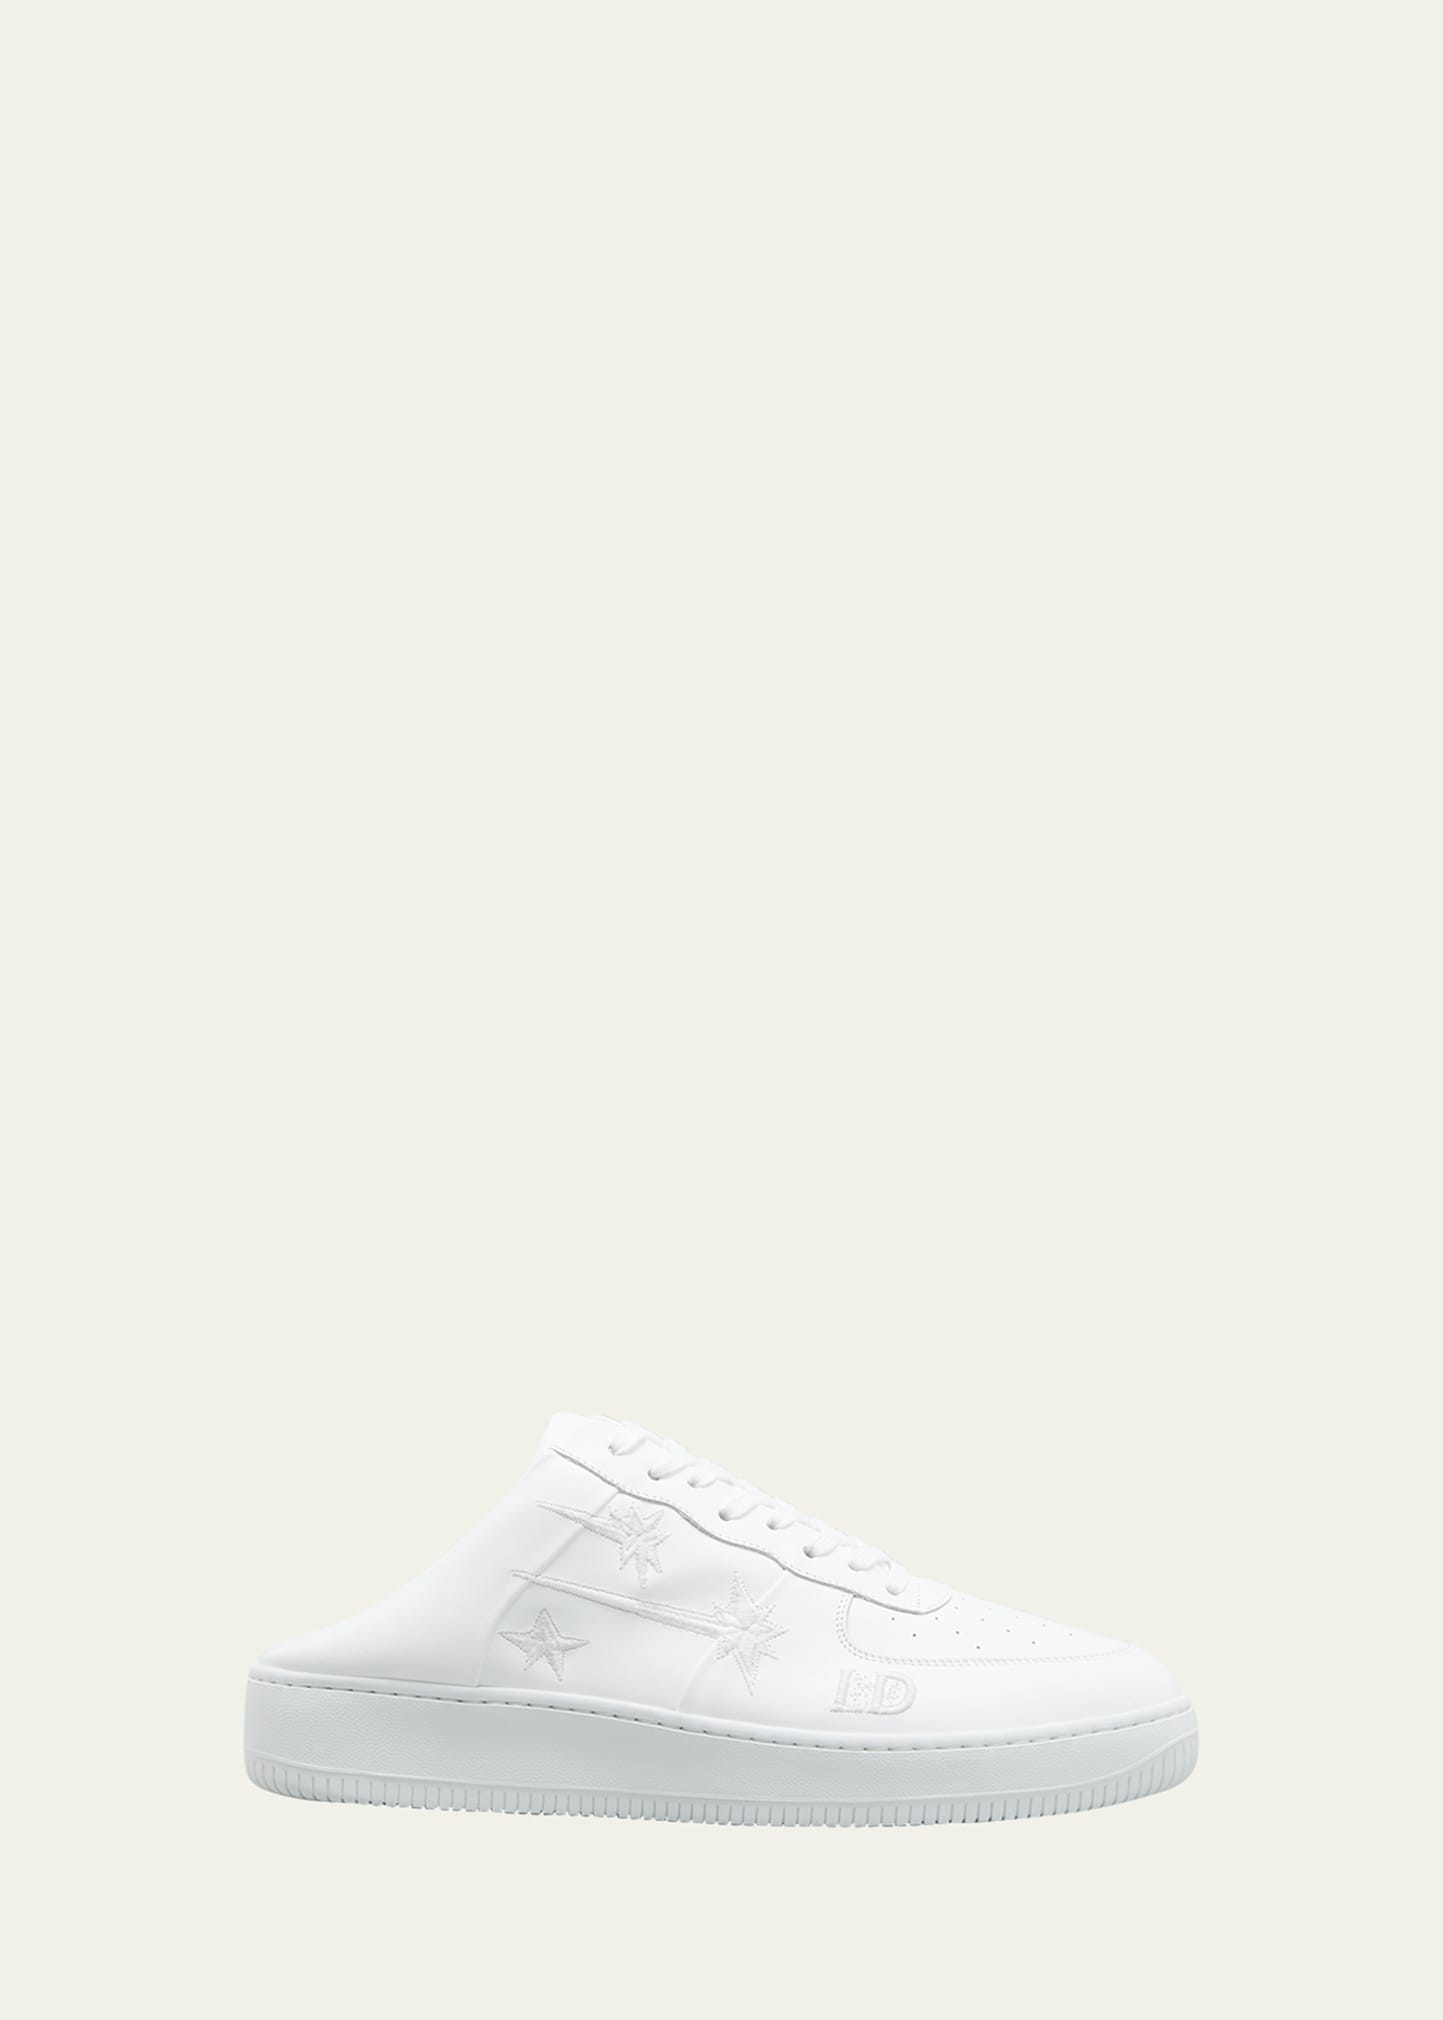 Lost Daze Men's Space Force 1 Tonal Leather Sneaker Mules In White